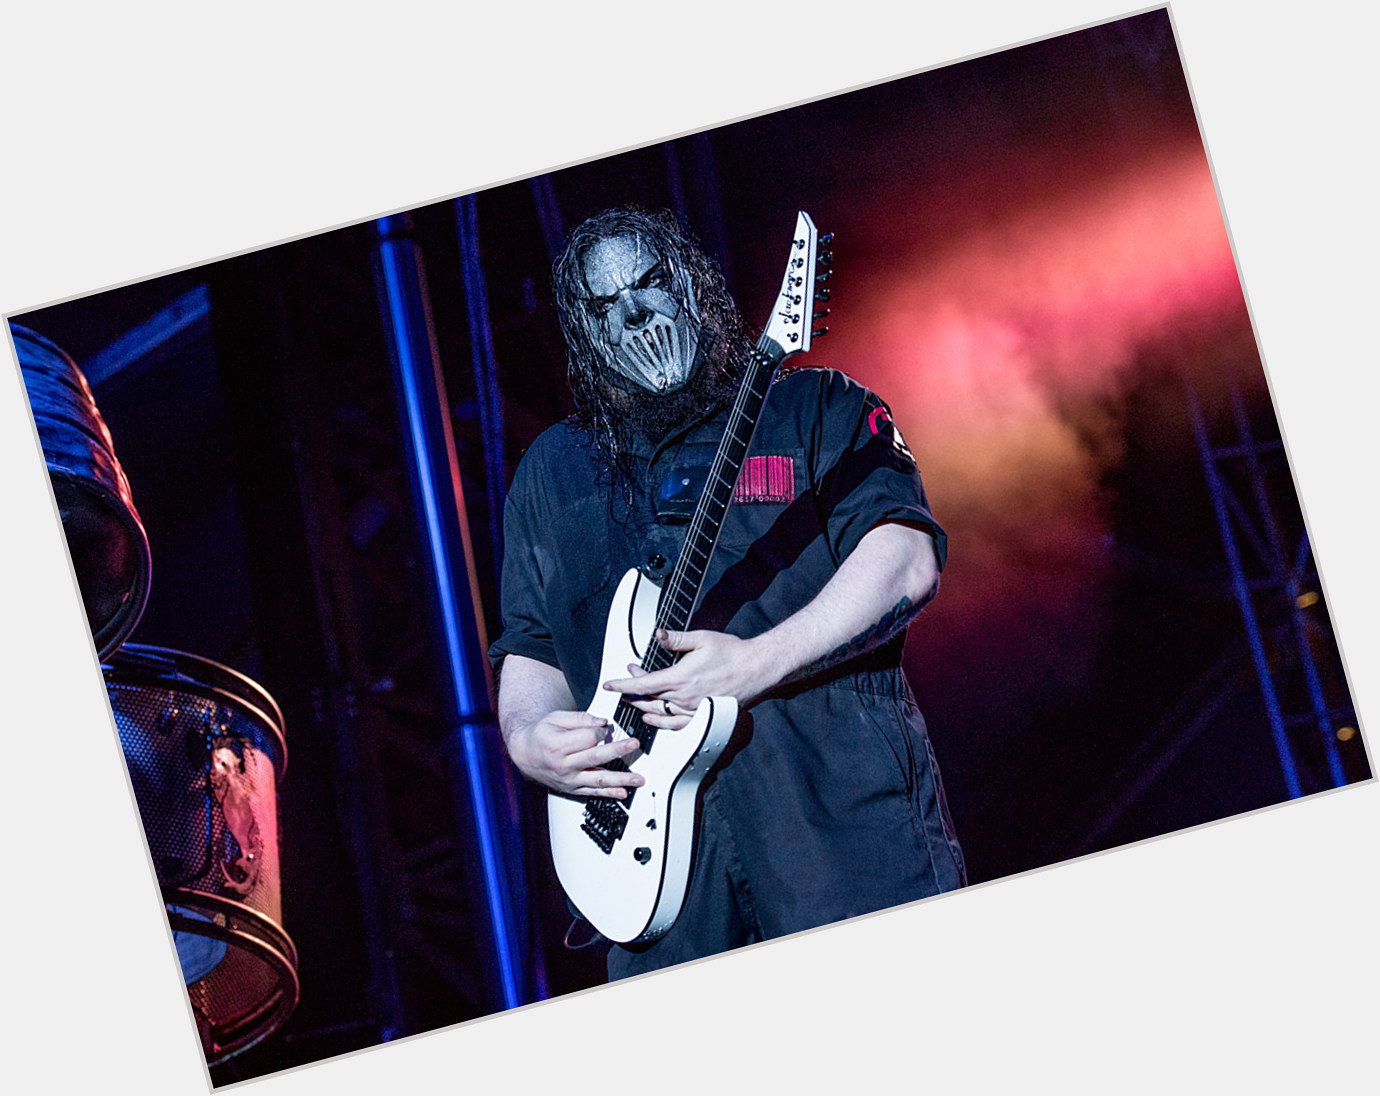 Please join us here at in wishing the one and only Mick Thomson a very Happy 47th Birthday today  